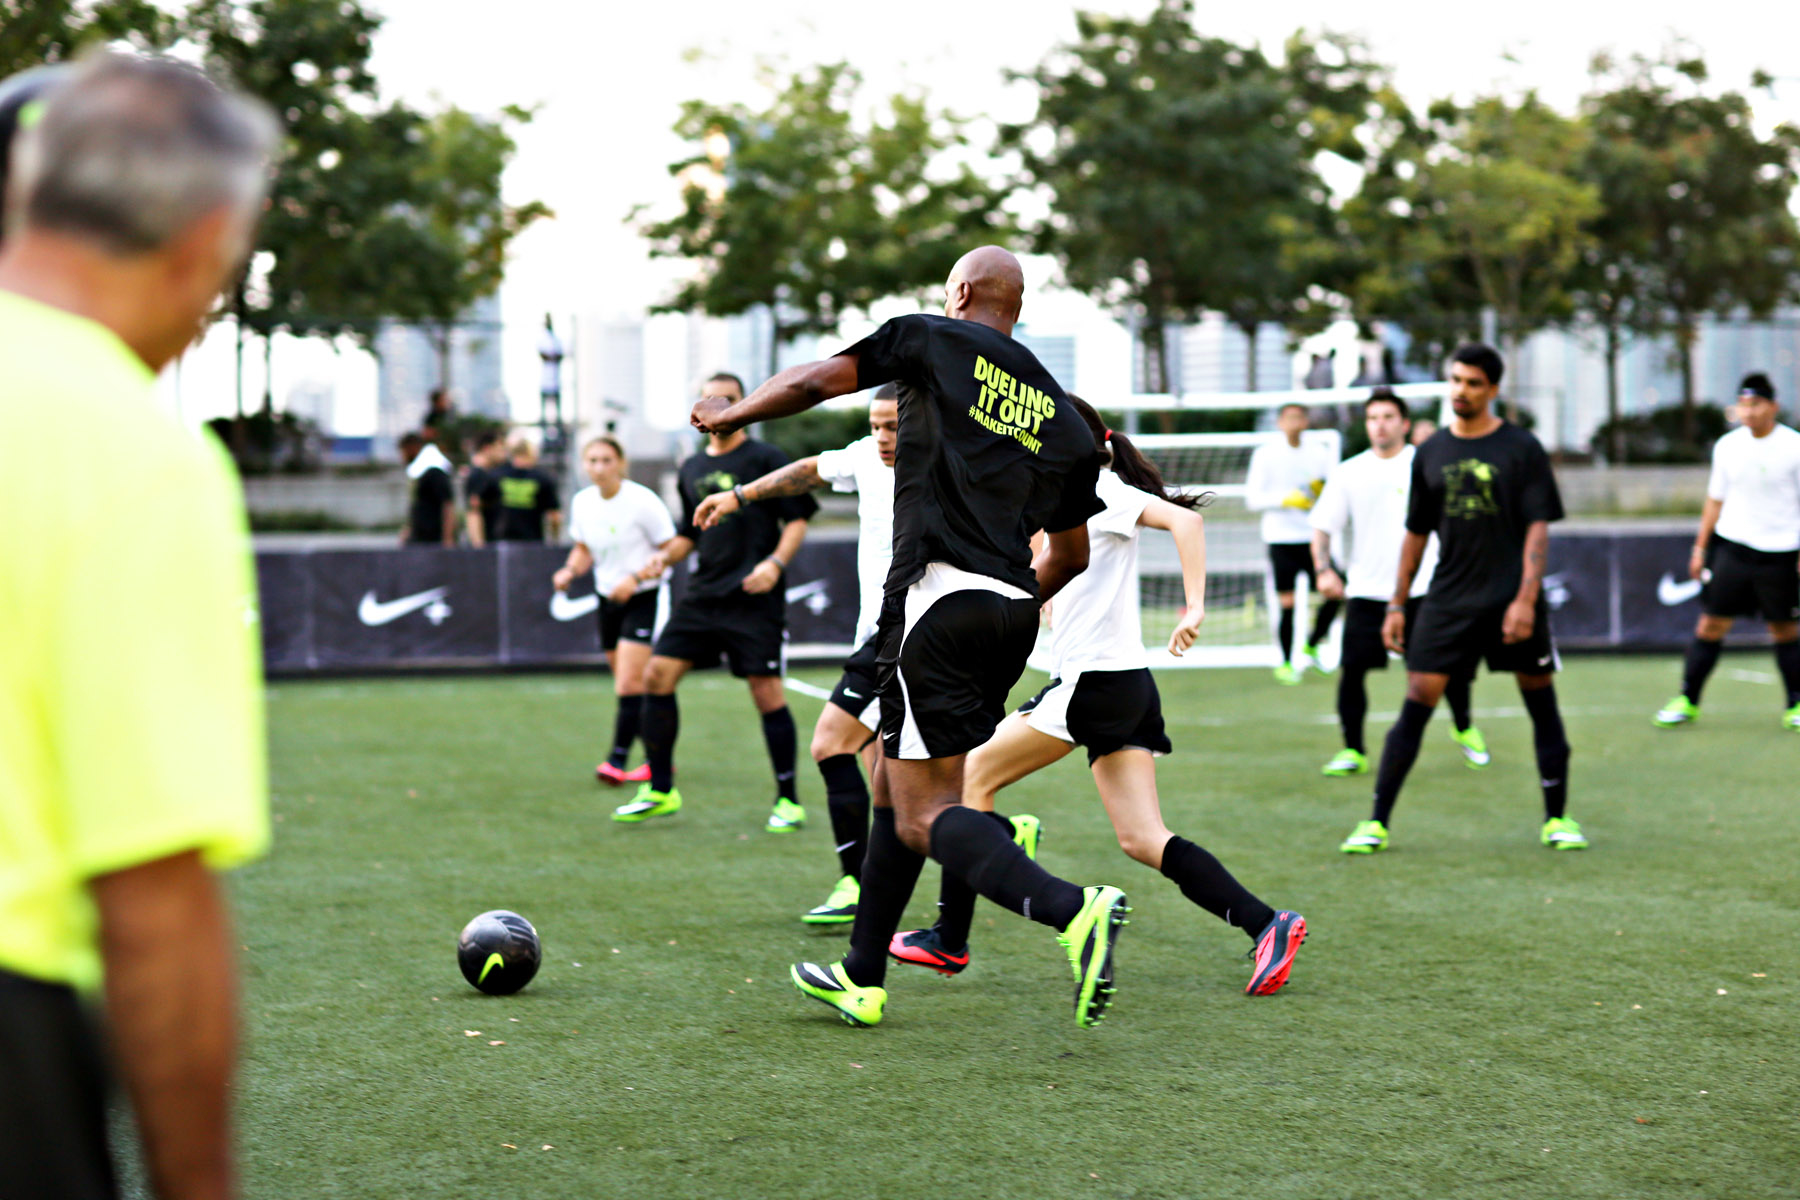 Soccer players running toward the ball during a Nike Fuel event on Pier 25's turf field